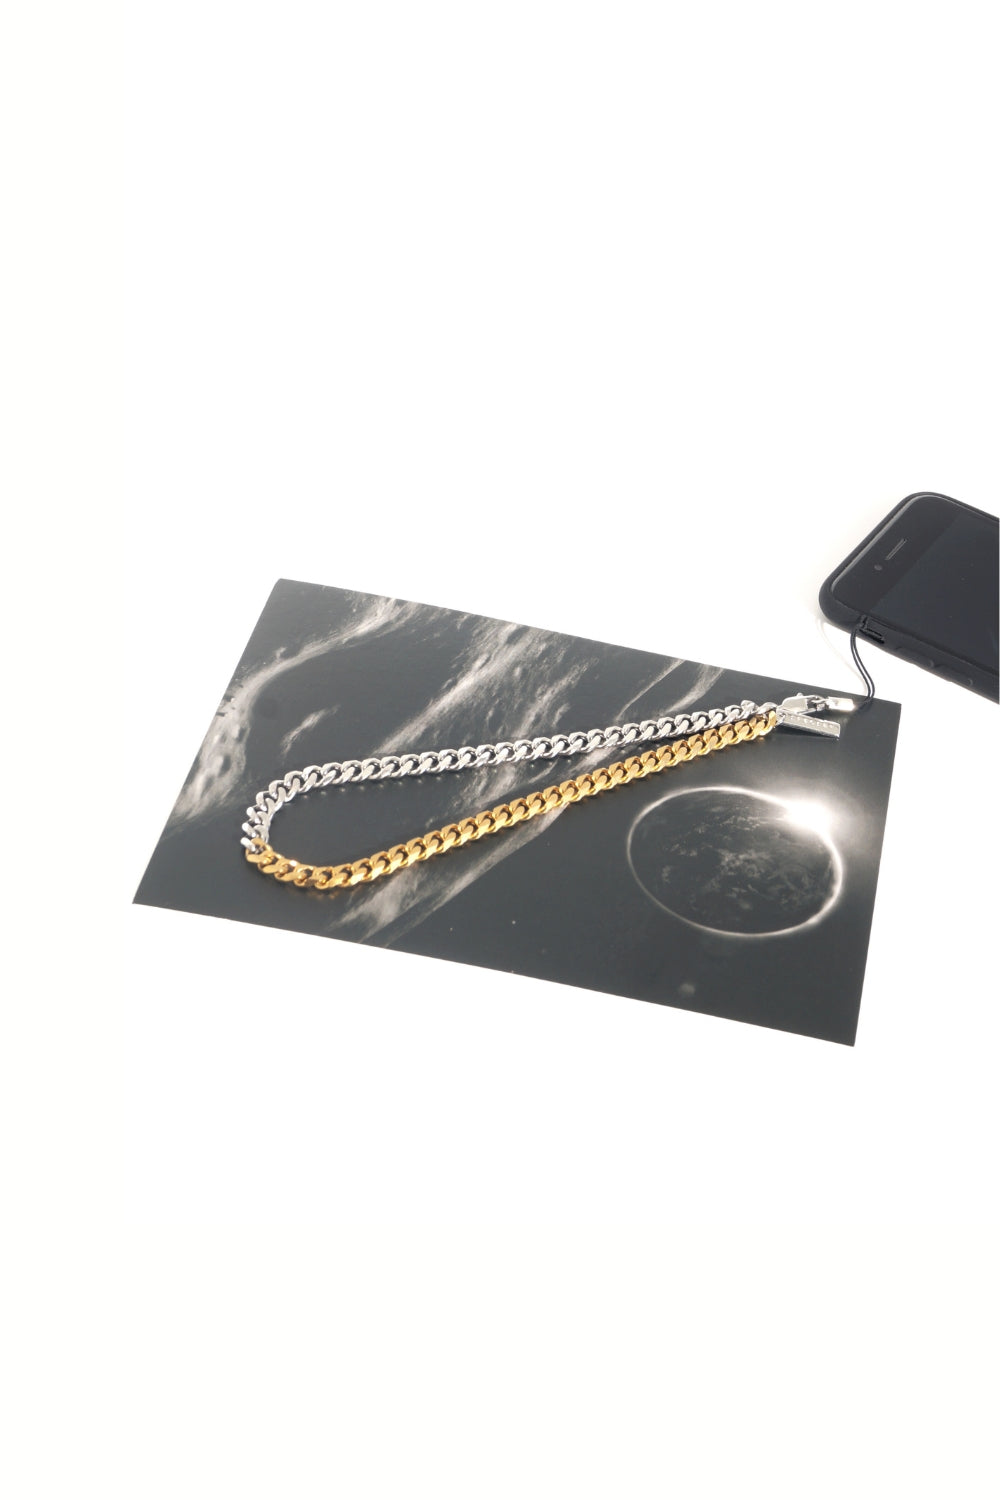 TWO-TONED - SILVER GOLD Wrist Phone Chain | SPECSET